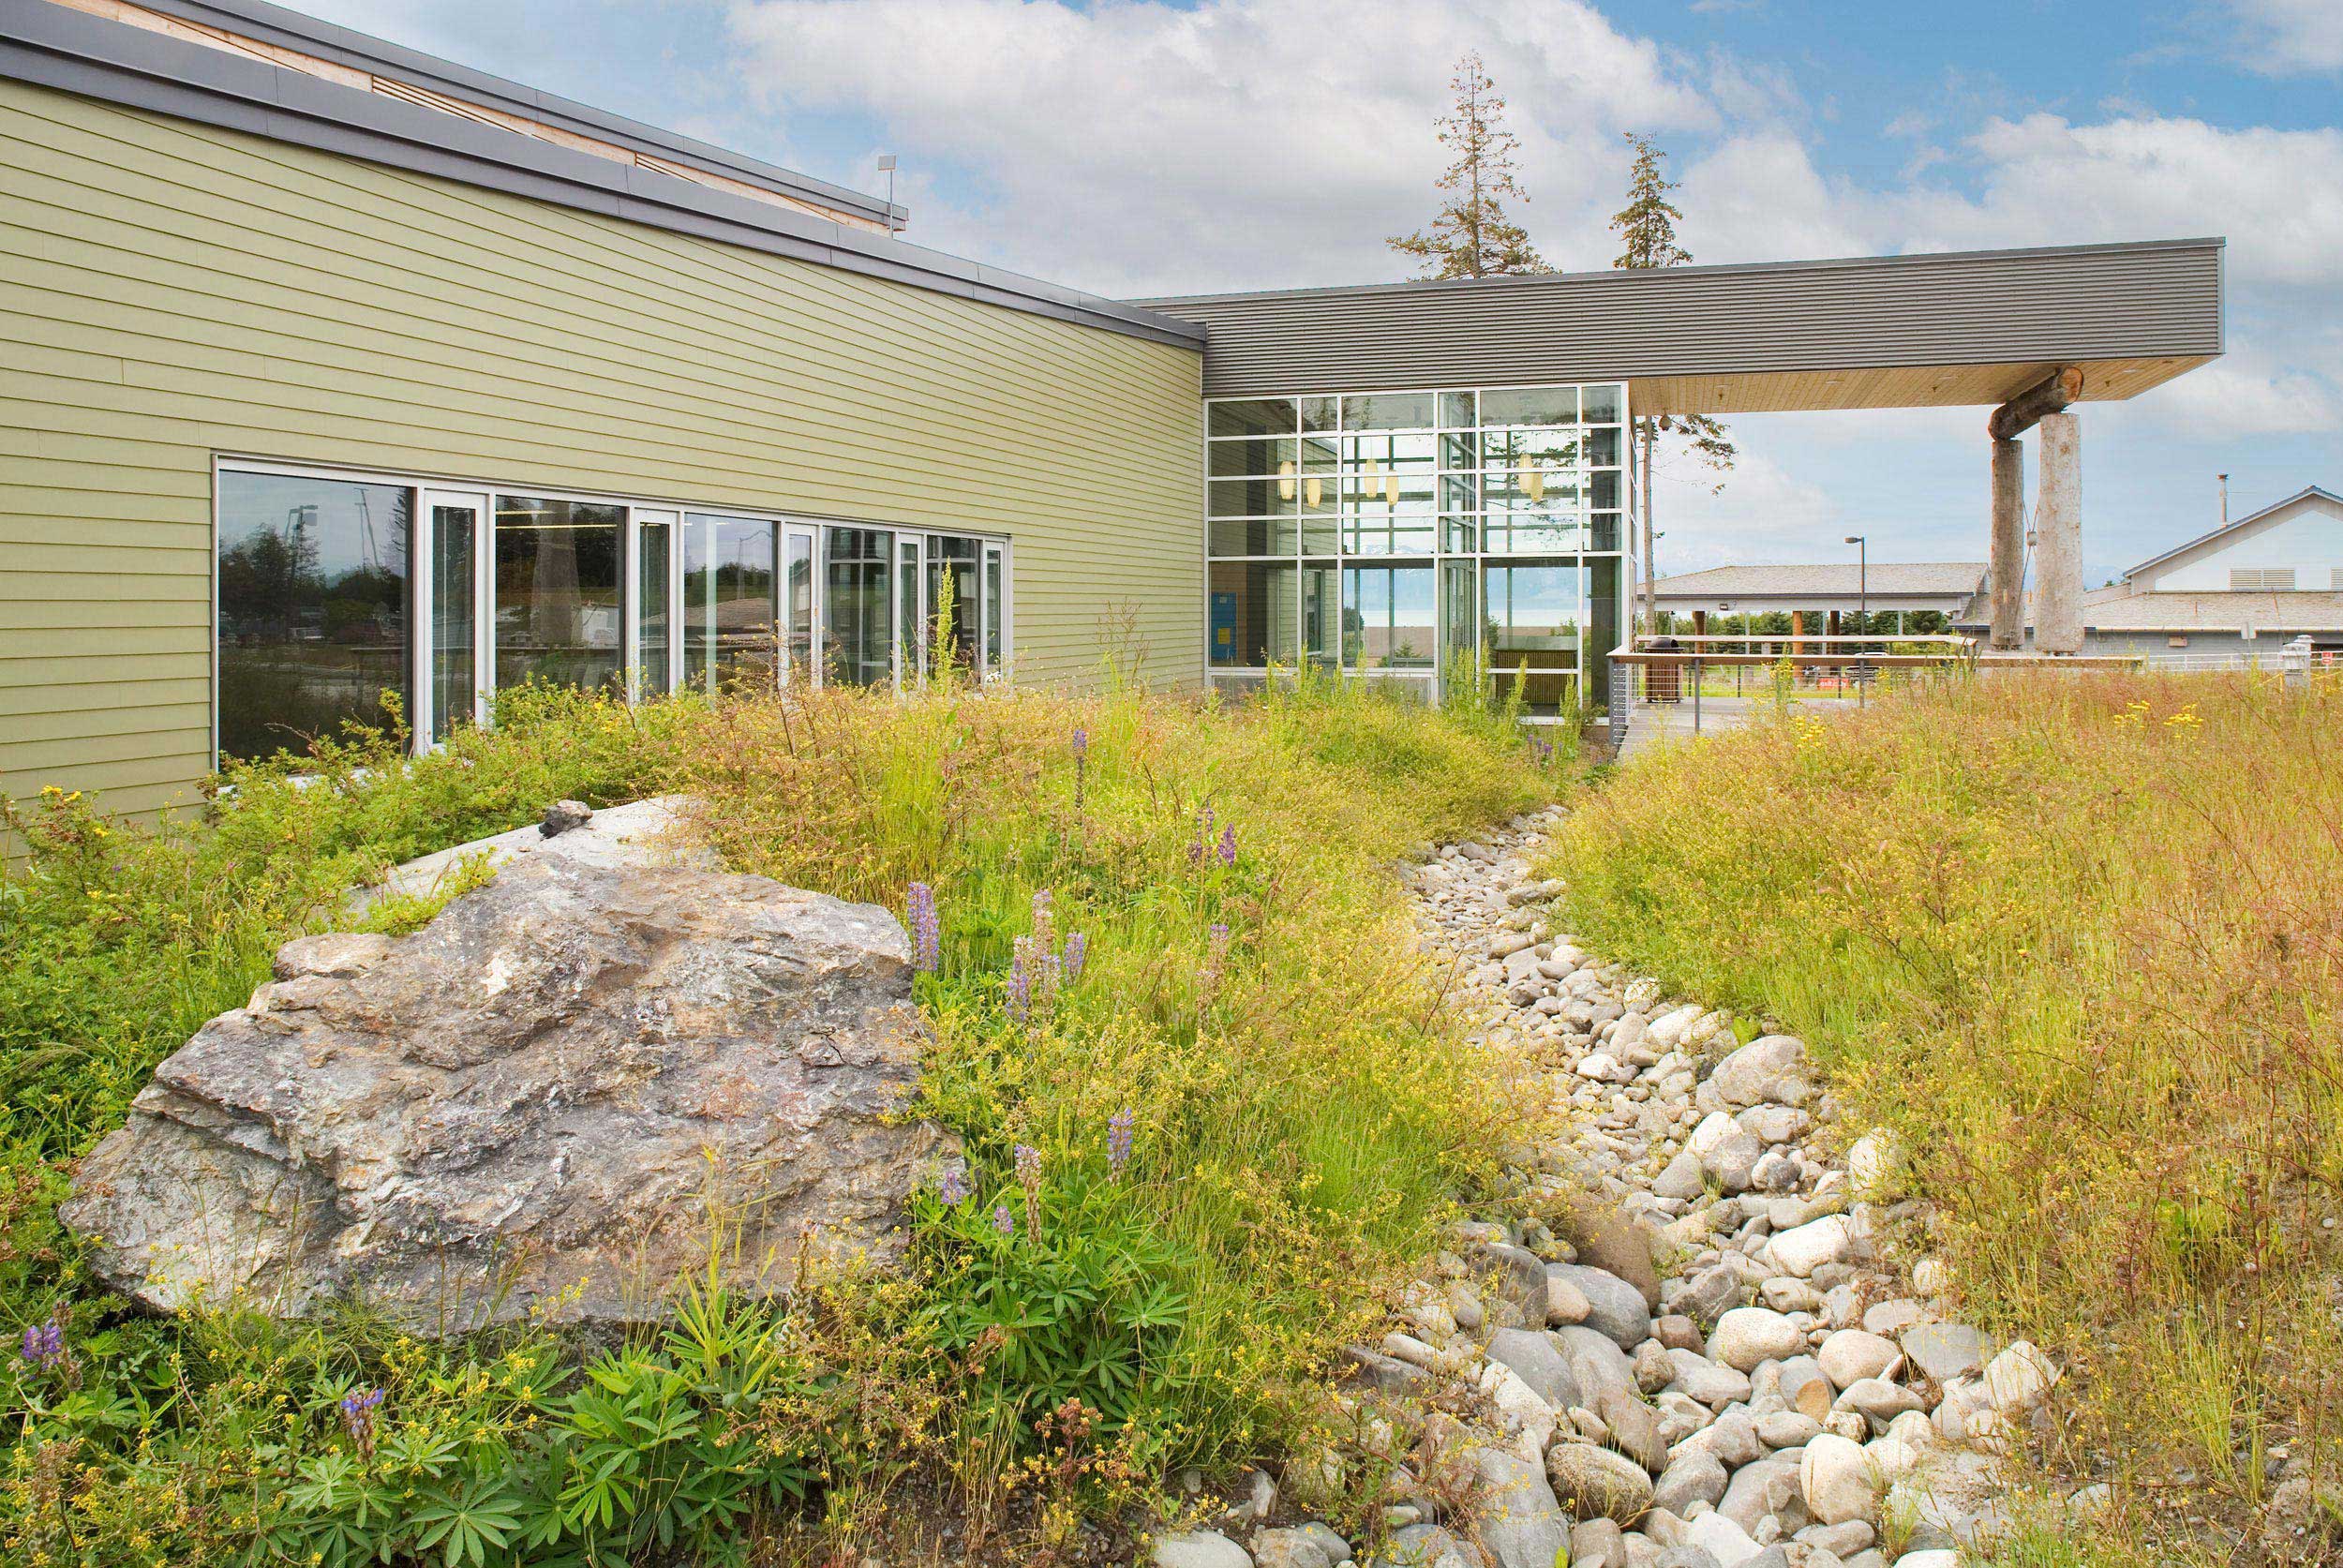 Photograph of the stunning green library in Homer, Alaska